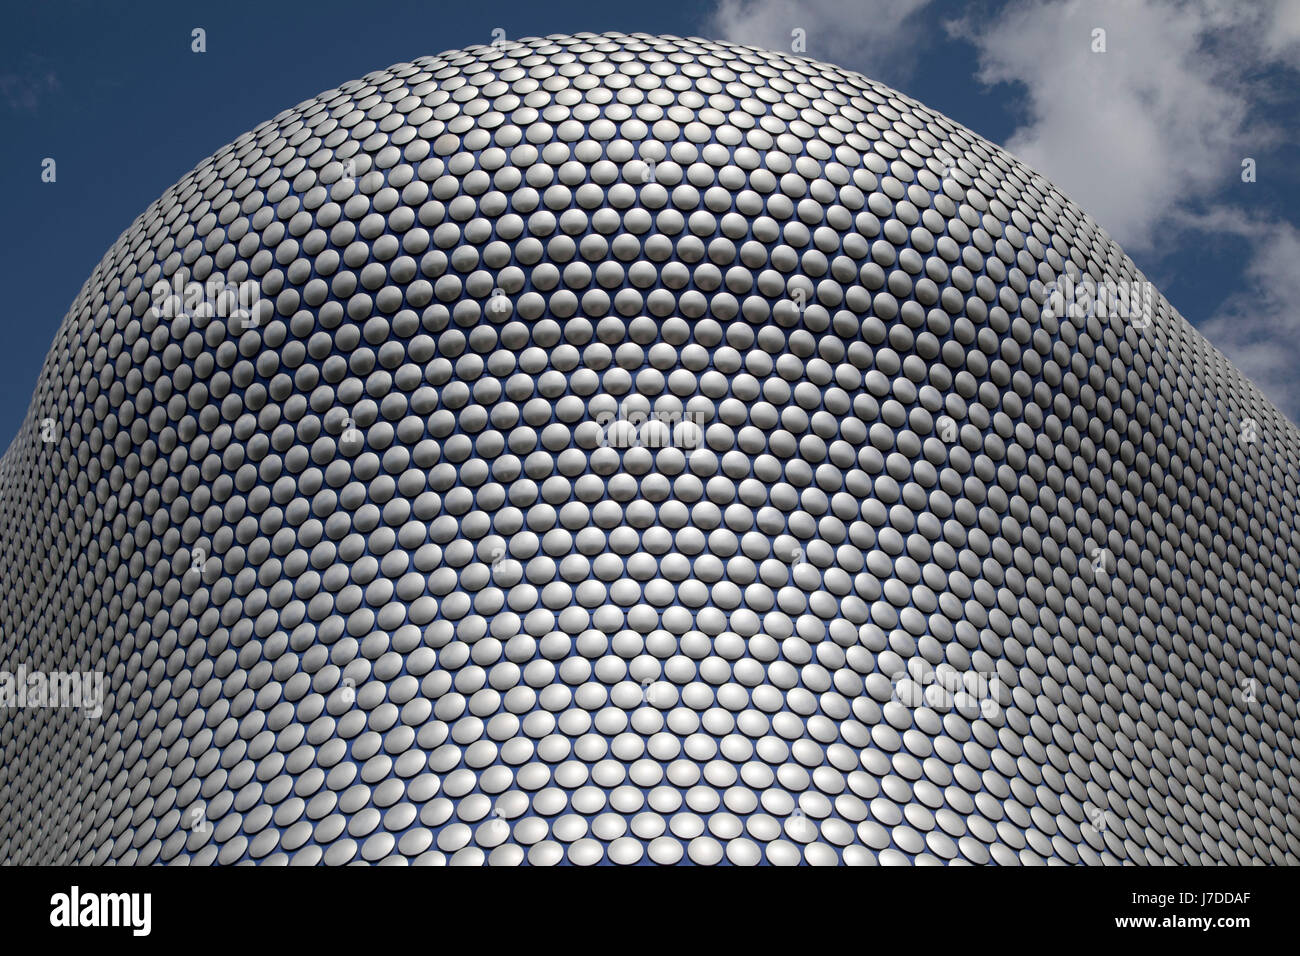 Modern landmark architecture of the Selfridges Building in Birmingham, United Kingdom. The building is part of the Bullring Shopping Centre and houses Selfridges Department Store. The building was completed in 2003 at a cost of £60 million and designed by architecture firm Future Systems. It has a steel framework with sprayed concrete facade. Since its construction, the building has become an iconic architectural landmark and seen as a major contribution to the regeneration of Birmingham. Stock Photo